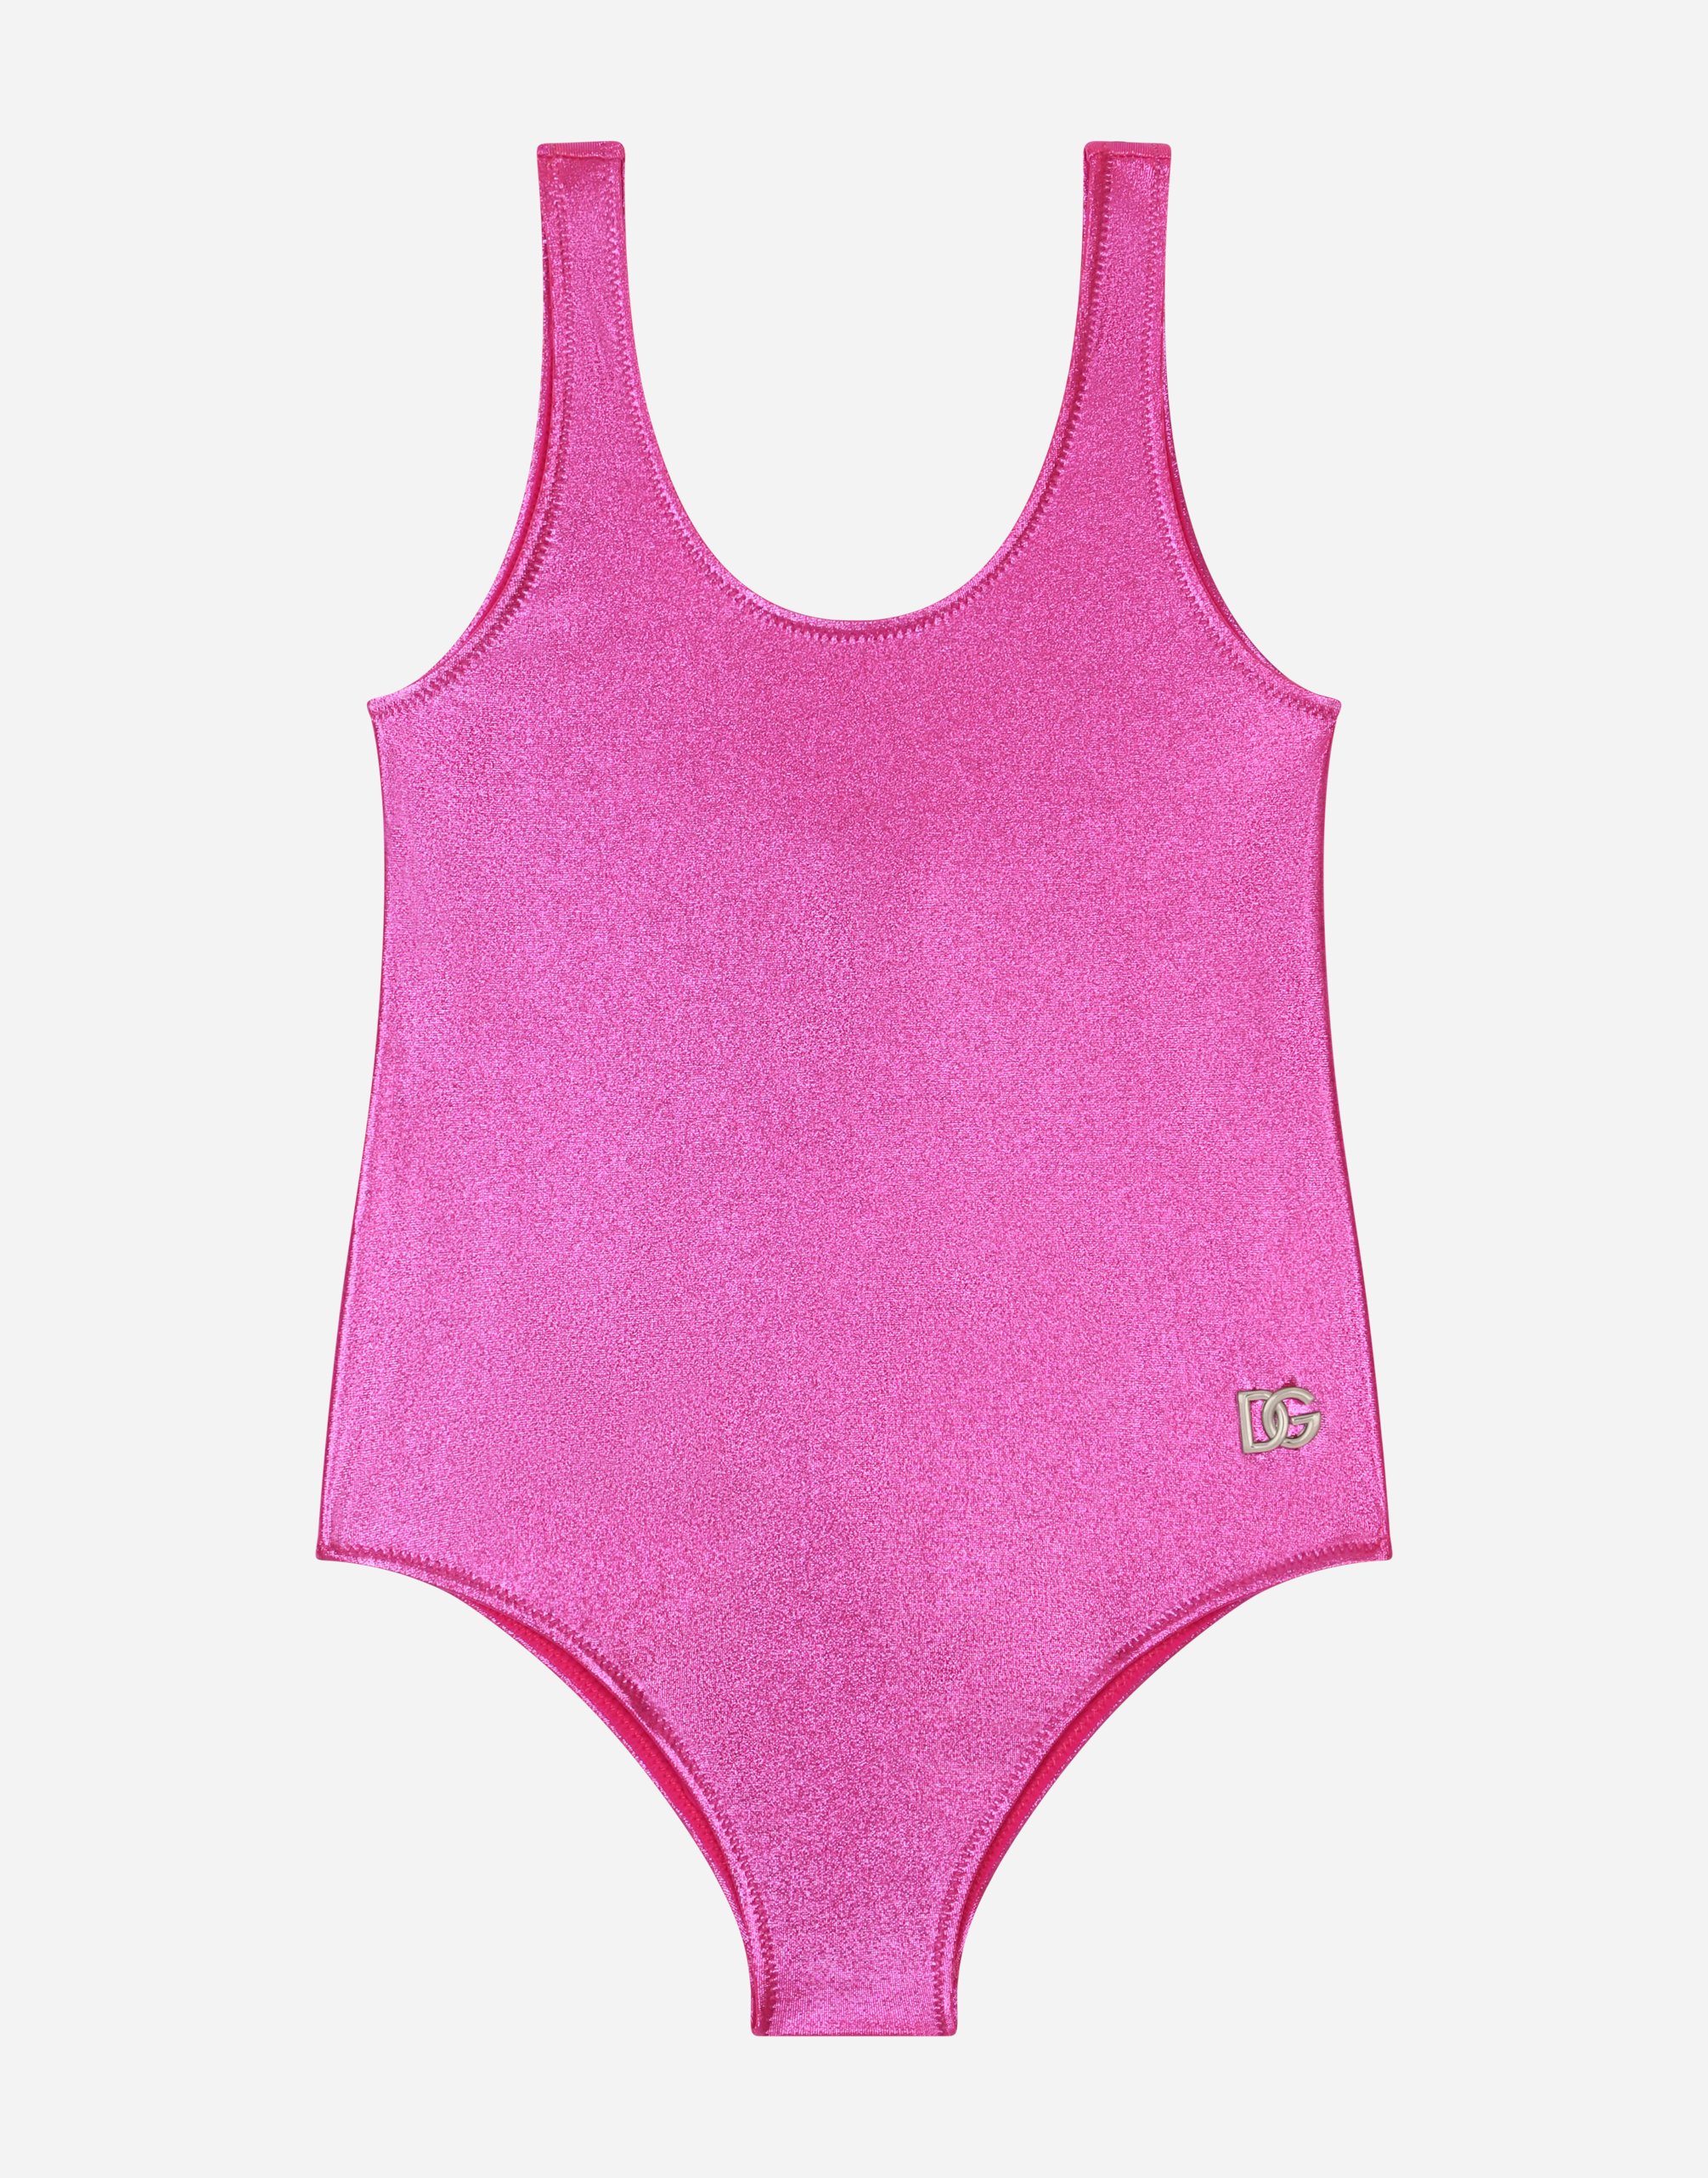 Dolce & Gabbana Kids' One-piece Swimsuit With Dg Logo In Pink